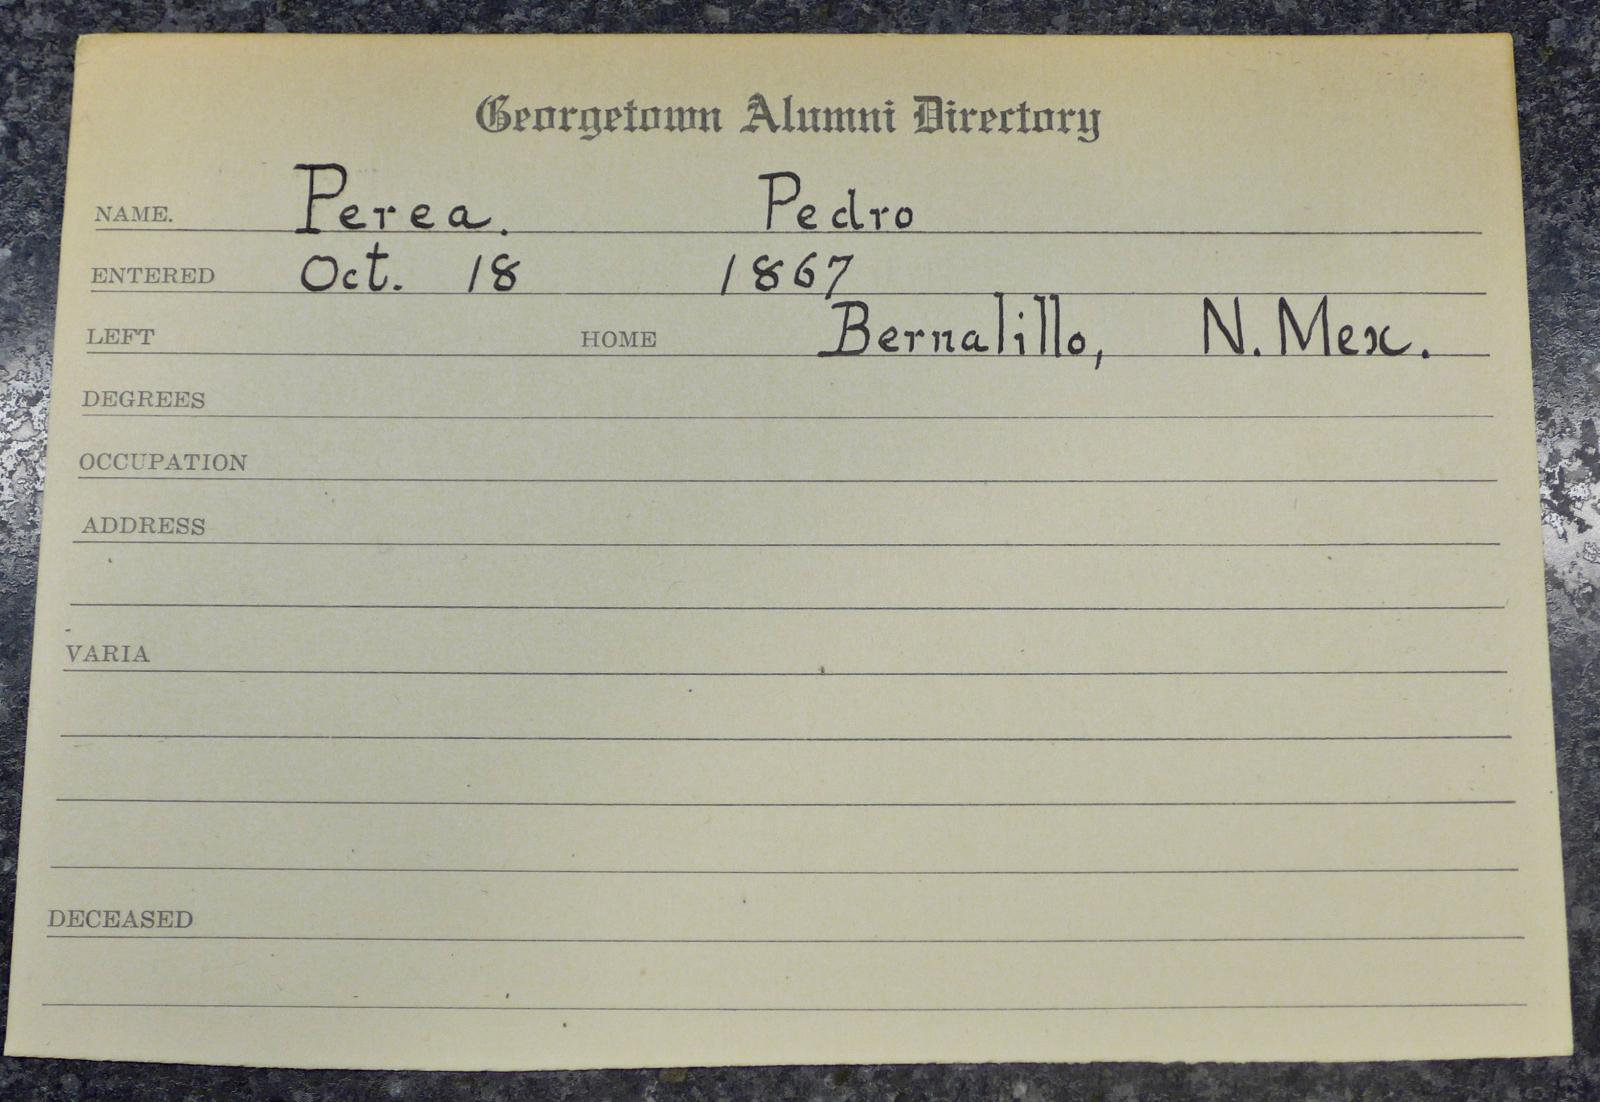 A Georgetown Alumni Directory card with Pedro Perea’s name on it